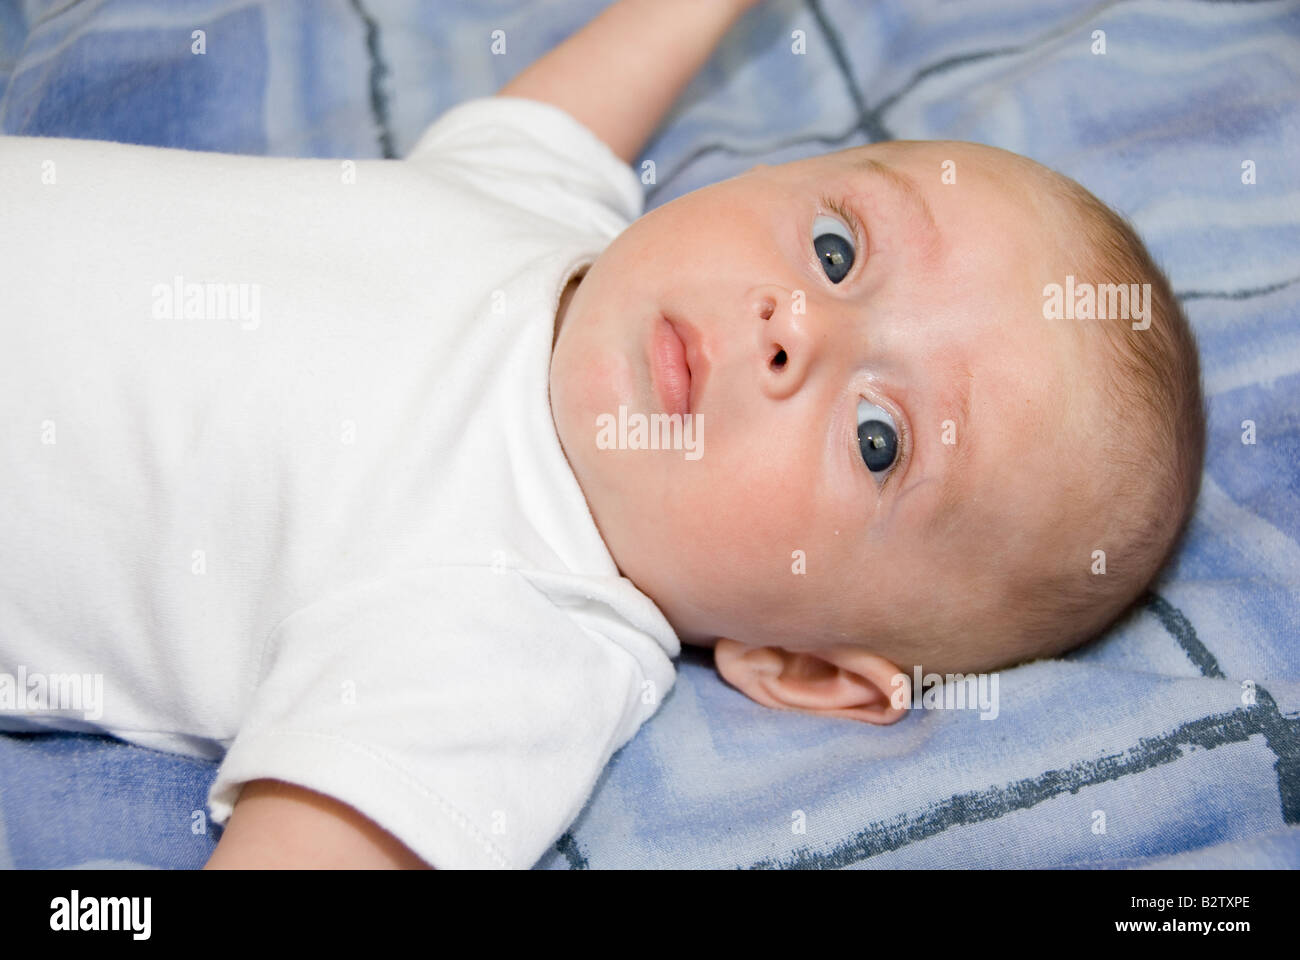 Baby Boy Joshua Kailas Hudson Aged 15 Weeks Lying on a Blue Bed Cover Looking Up Stock Photo